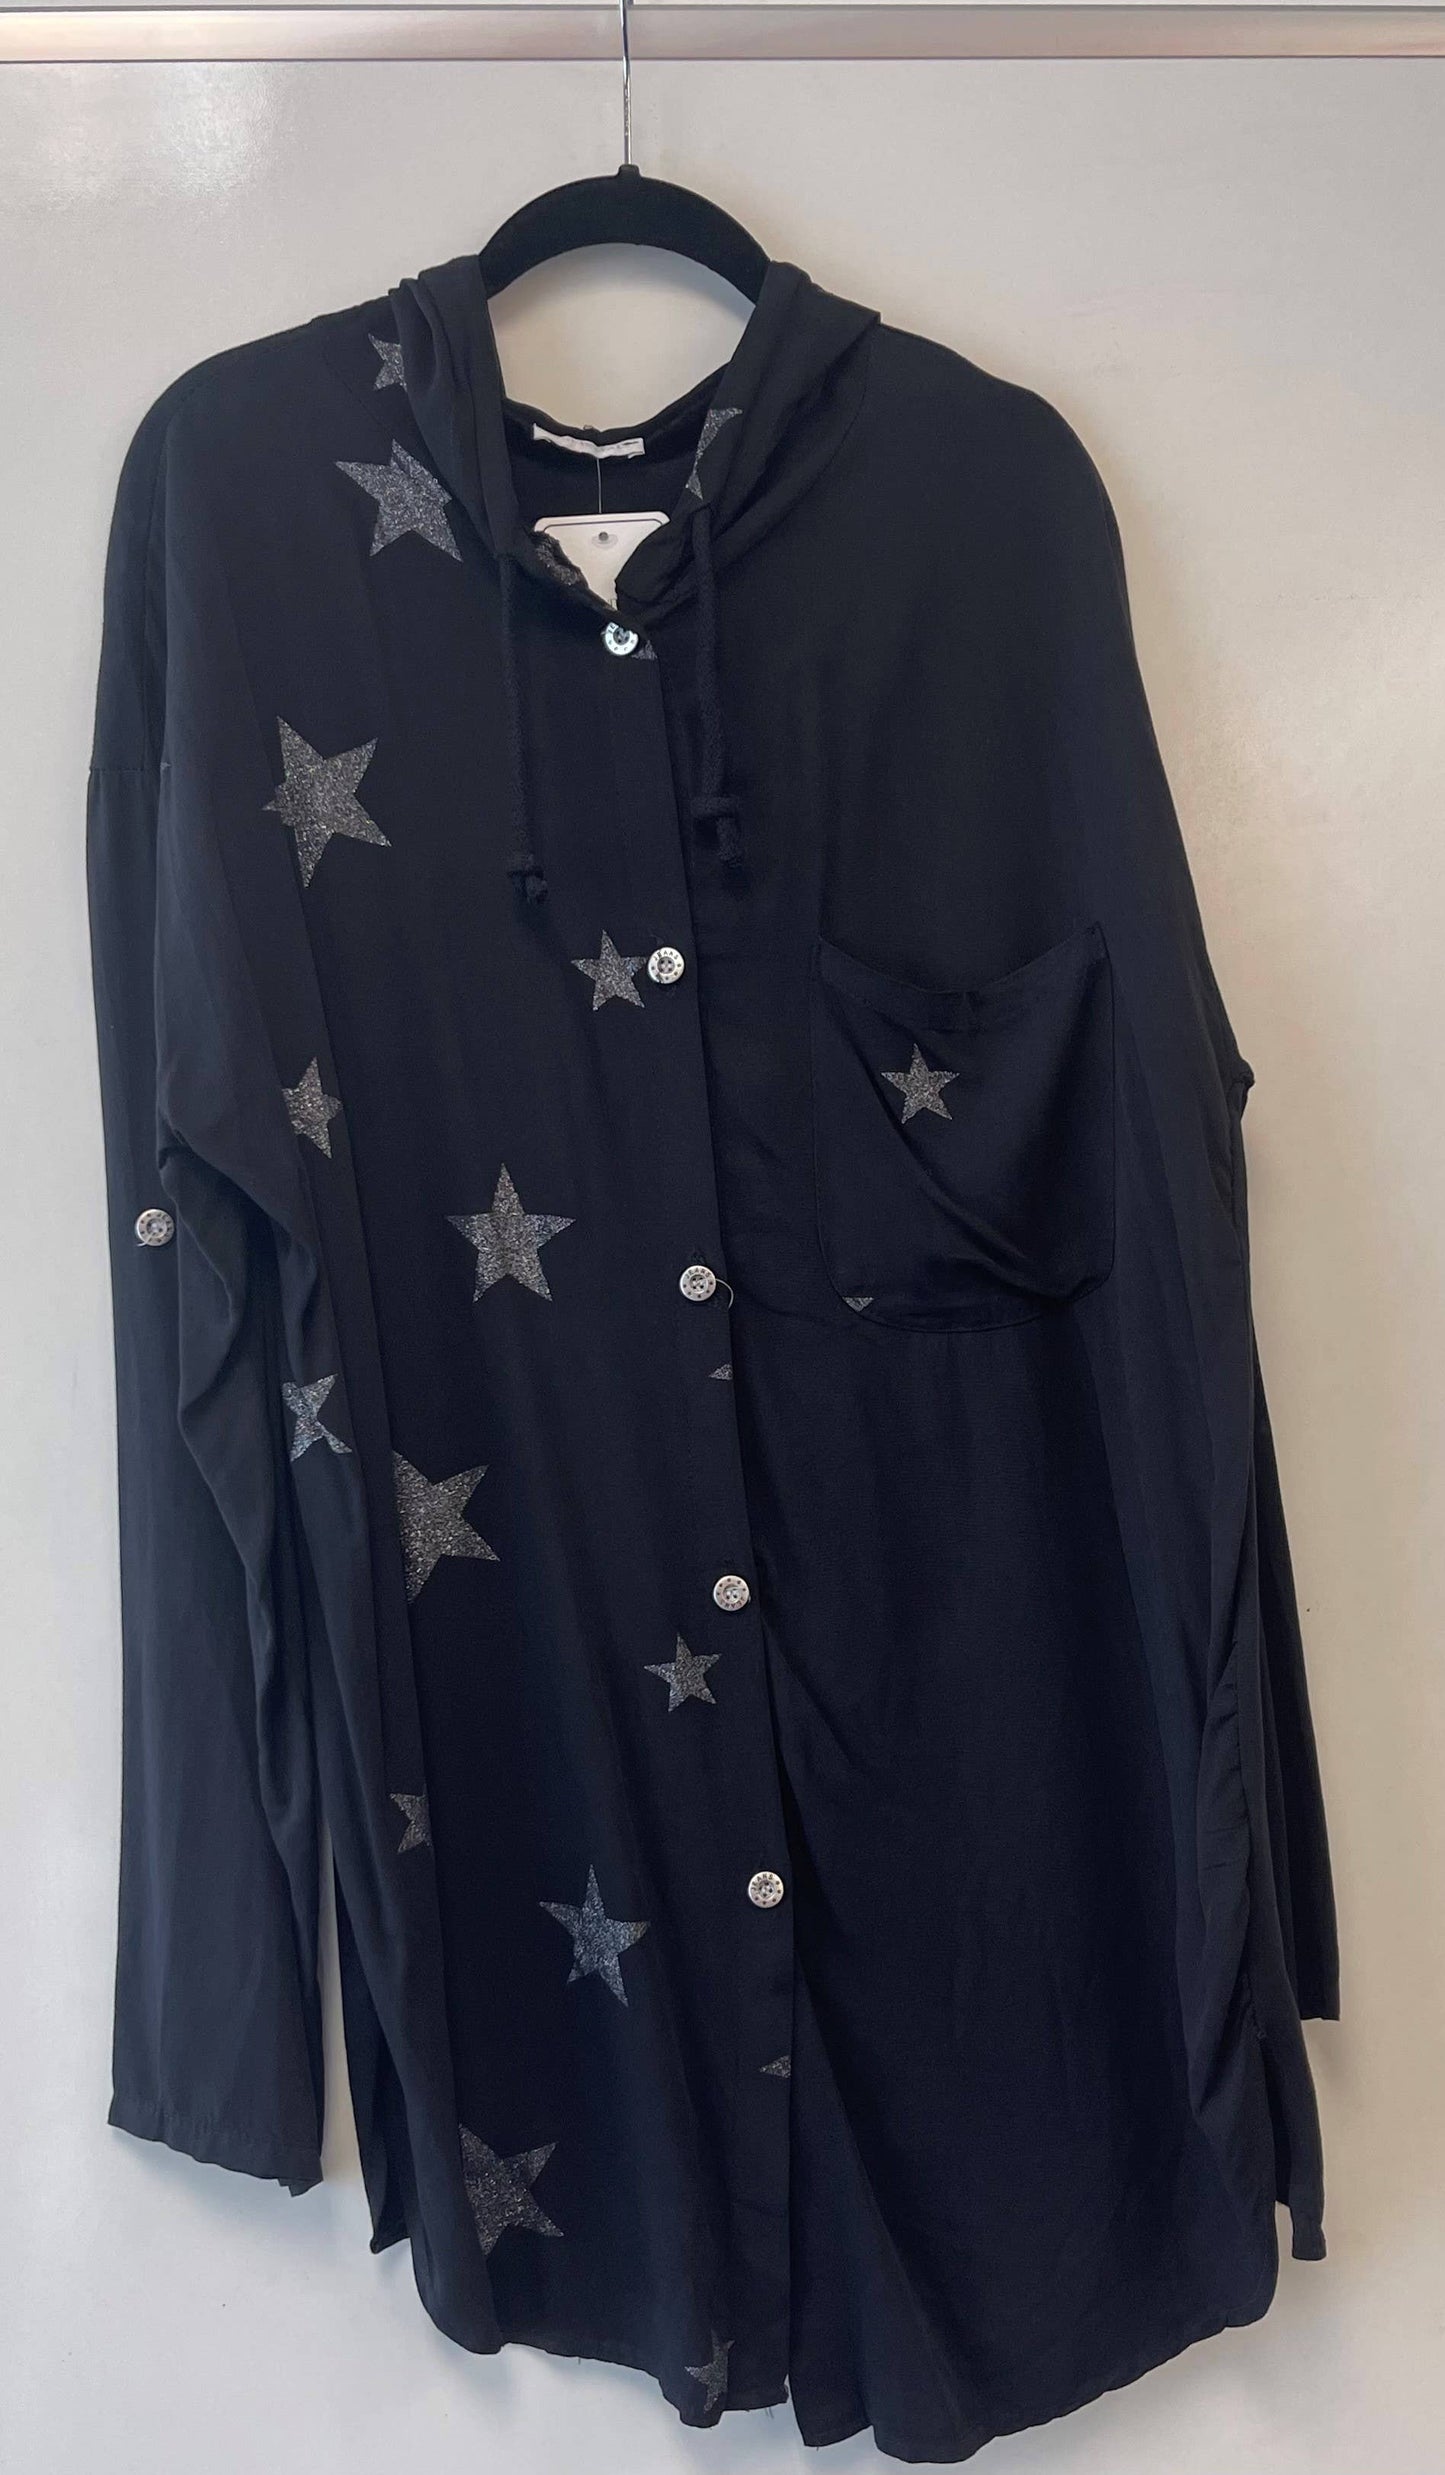 Shirt-Button Down Front with Metallic Stars Stretchy Back